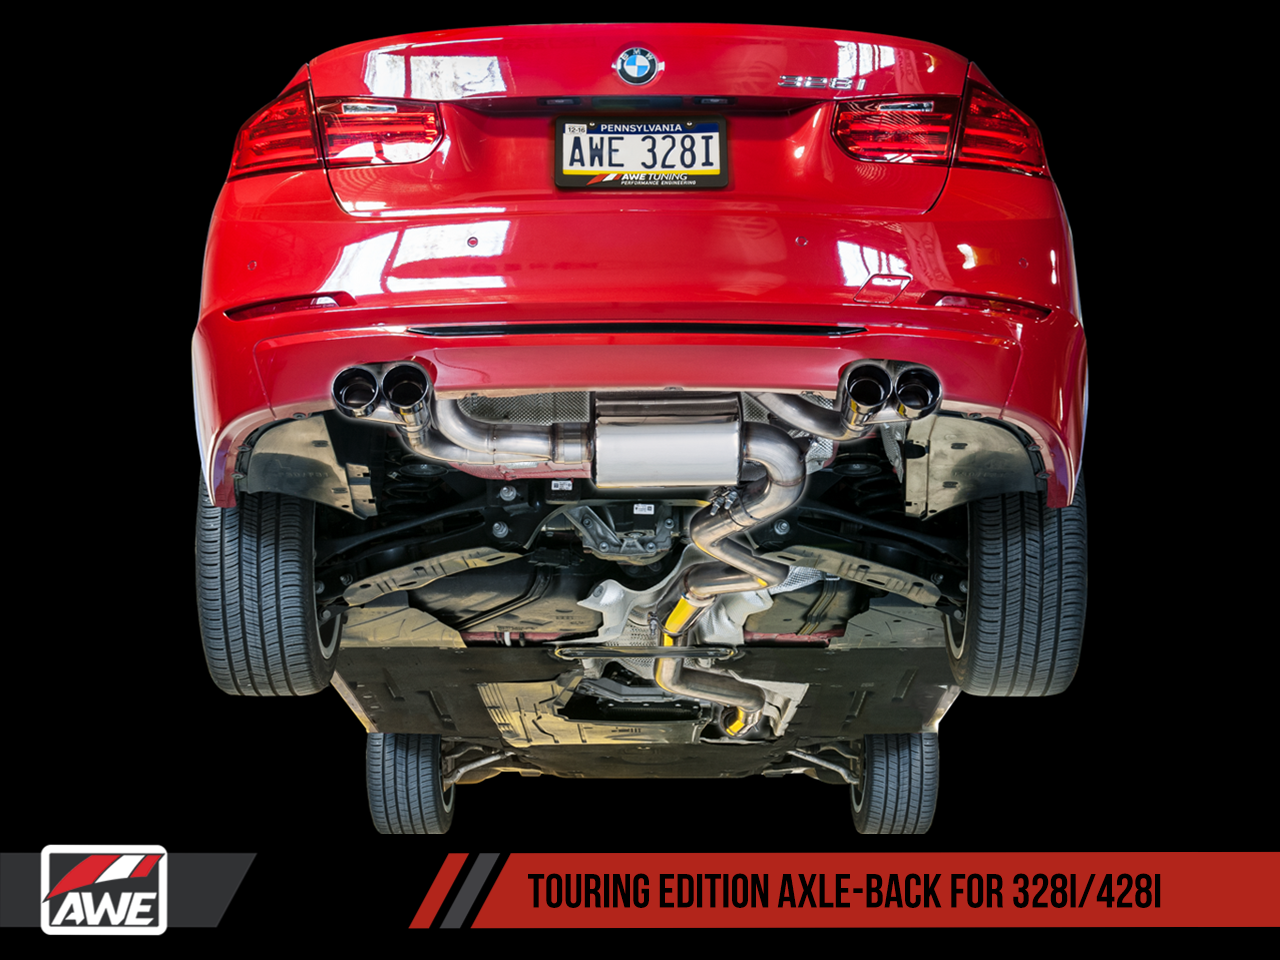 AWE Exhaust Suite for BMW F3X 428i / 430i